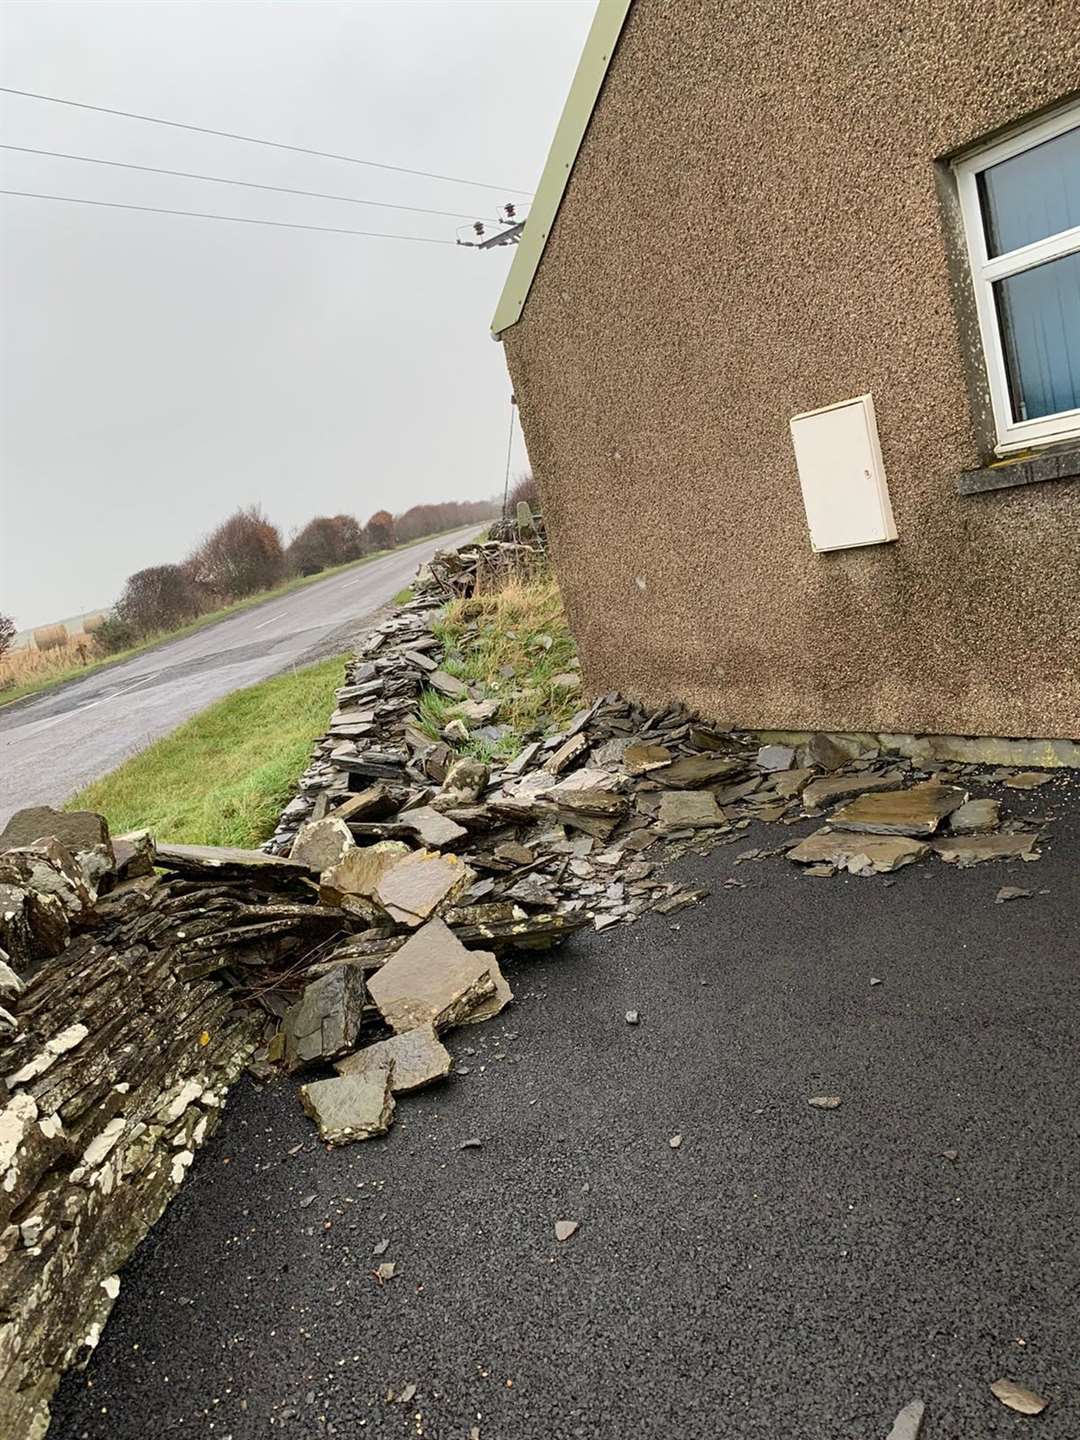 Damage from an accident at Forss which saw a vehicle strike a garden wall.